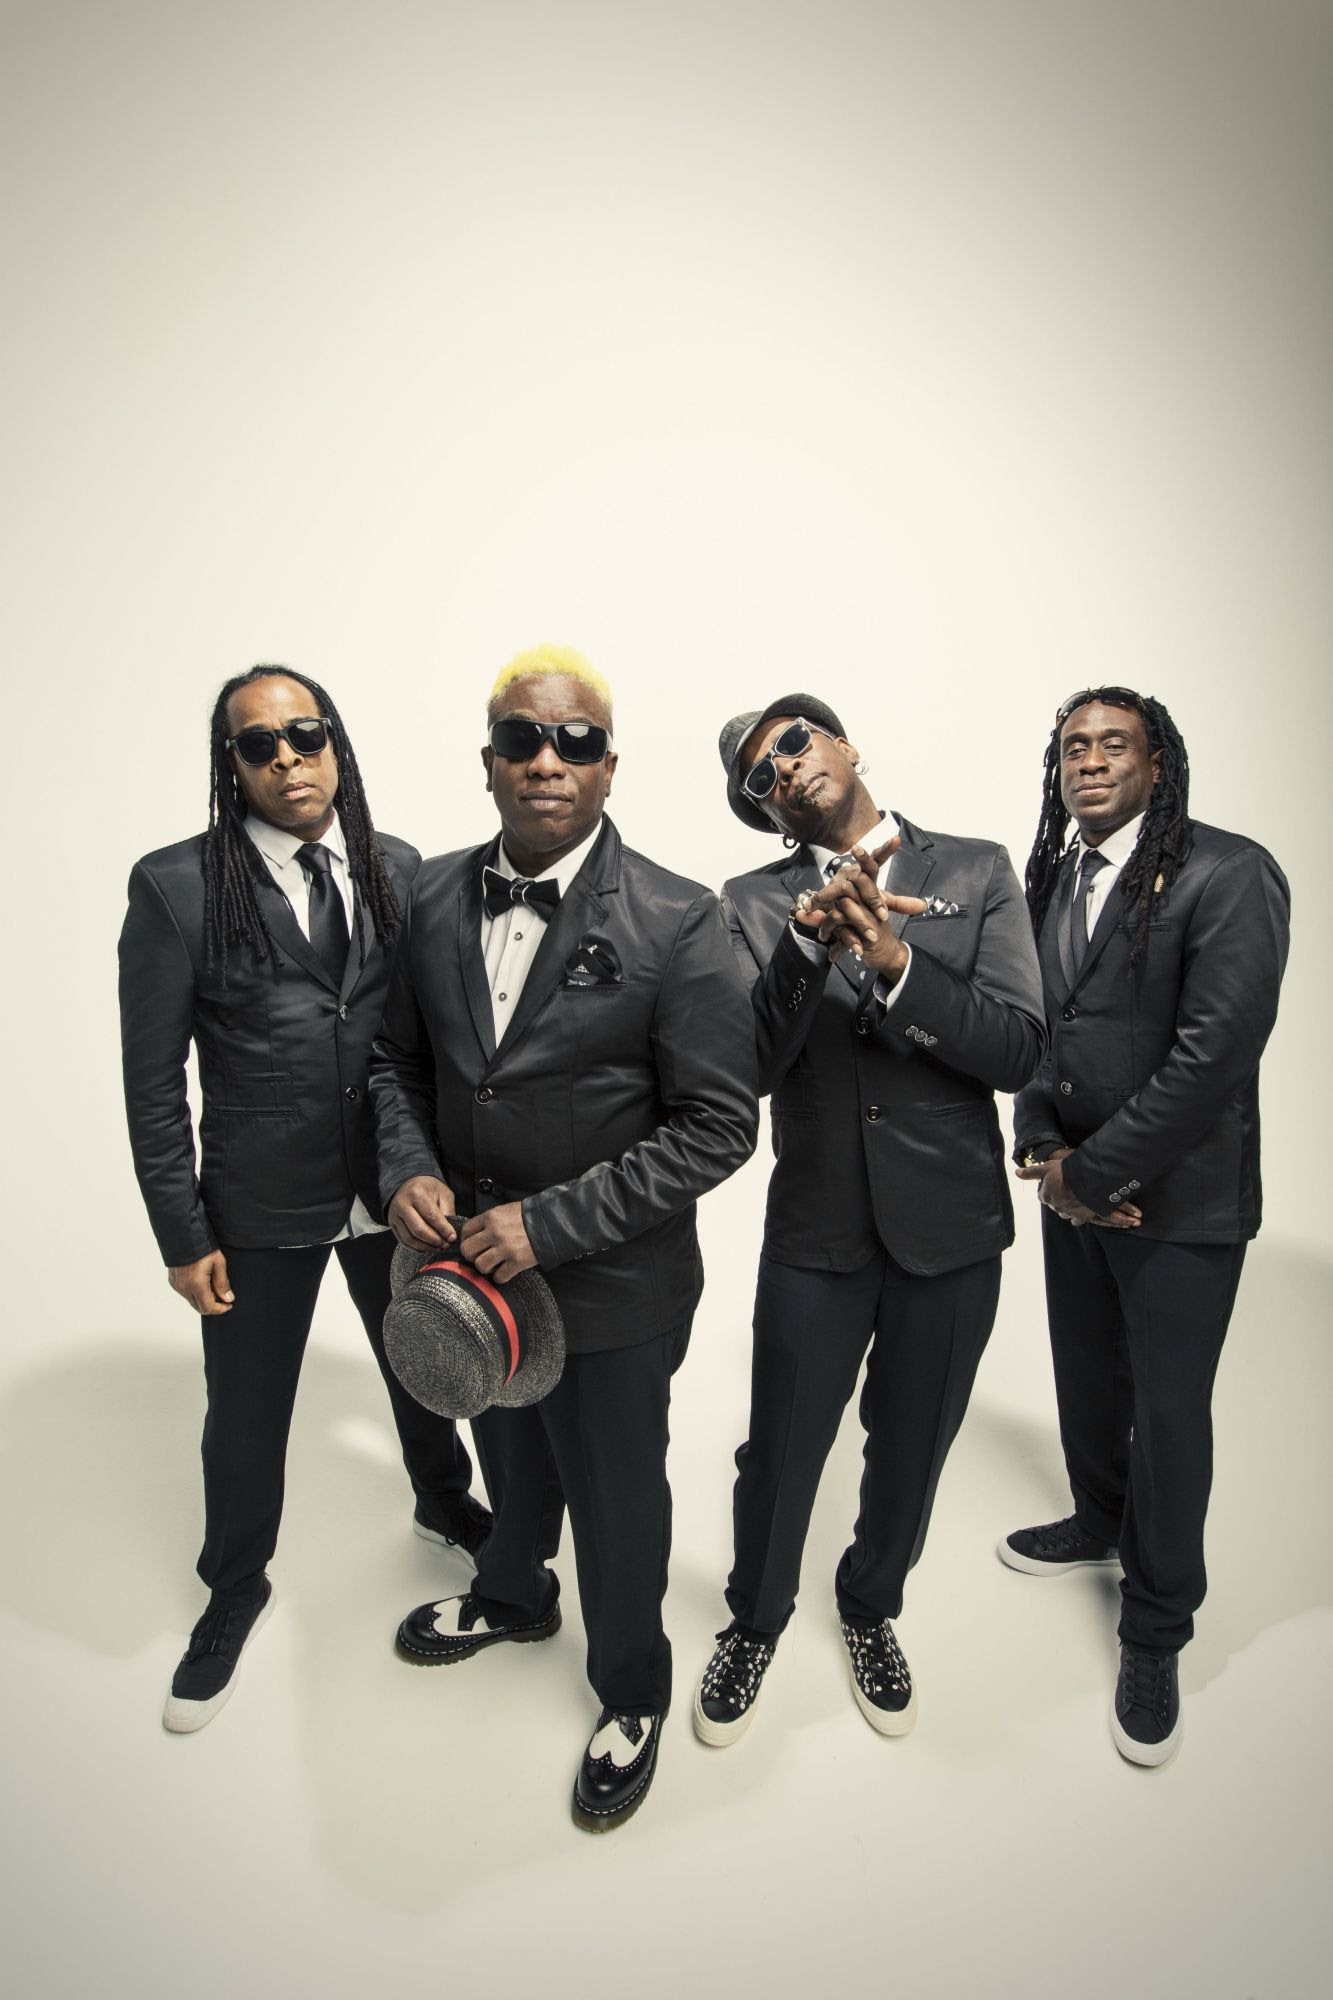 Living Colour promotional shot. Photo by: Travis Shinn. Photo provided by: Calabro Music Media